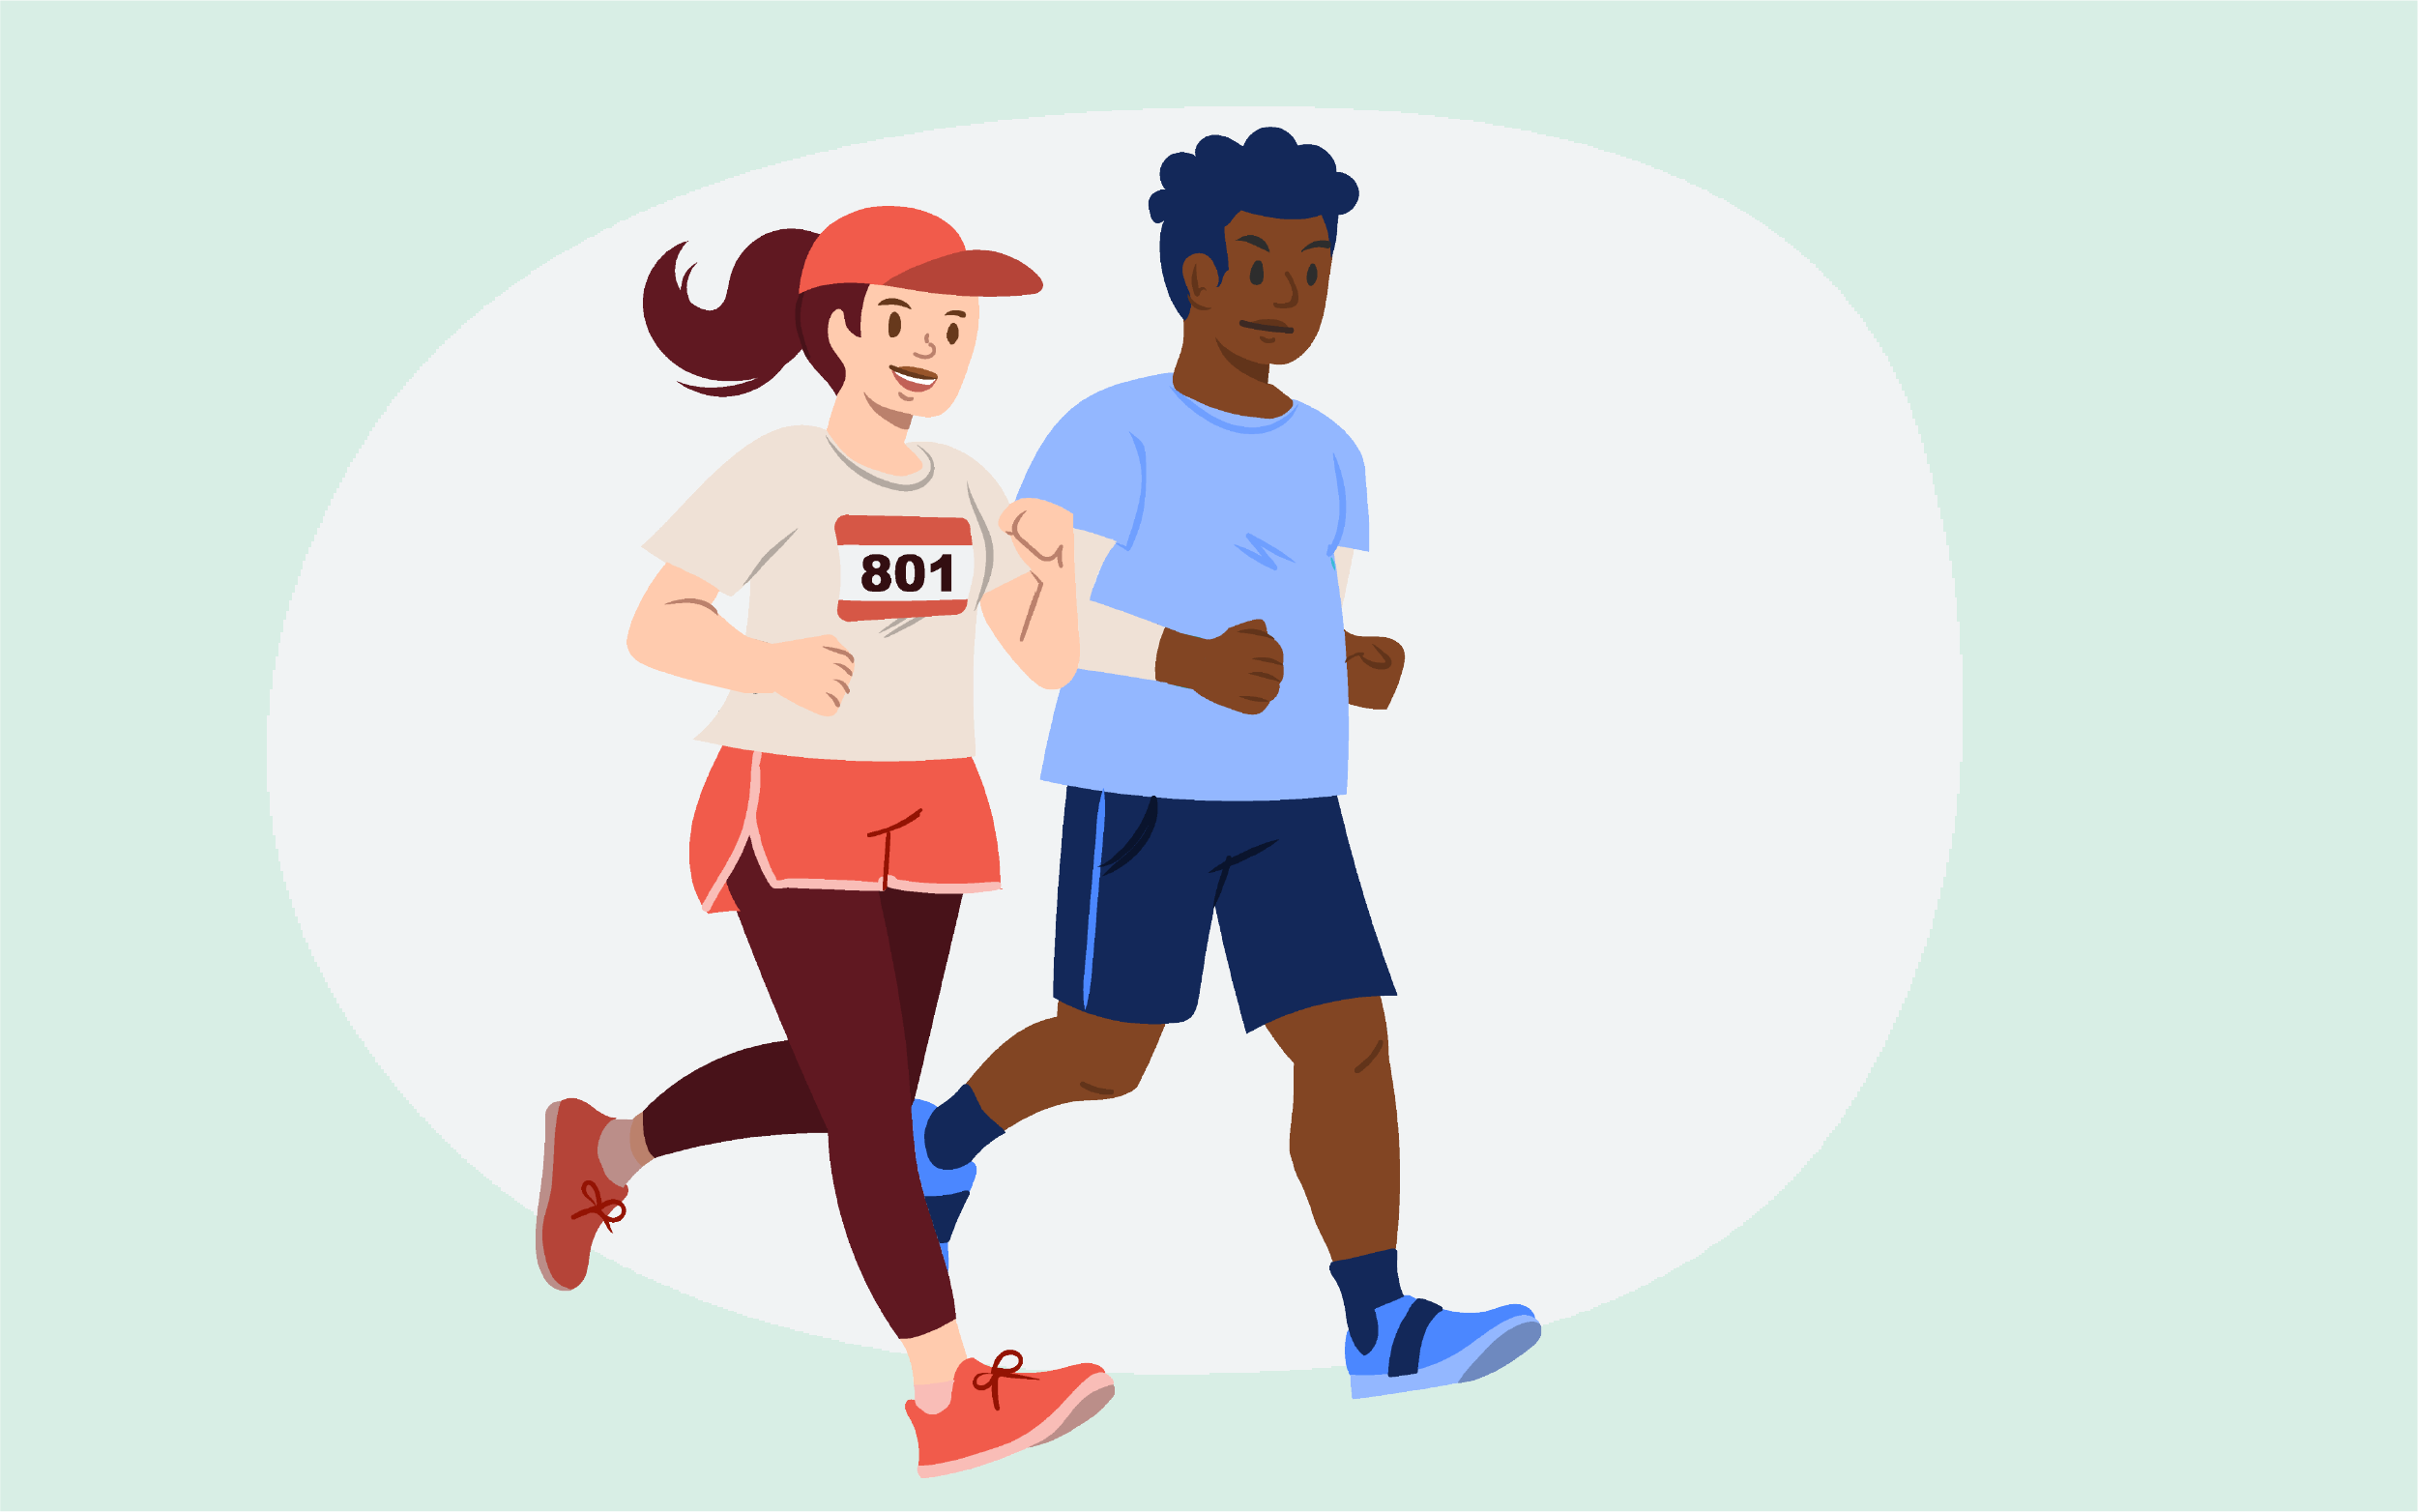 Illustration. Two runners running side by side